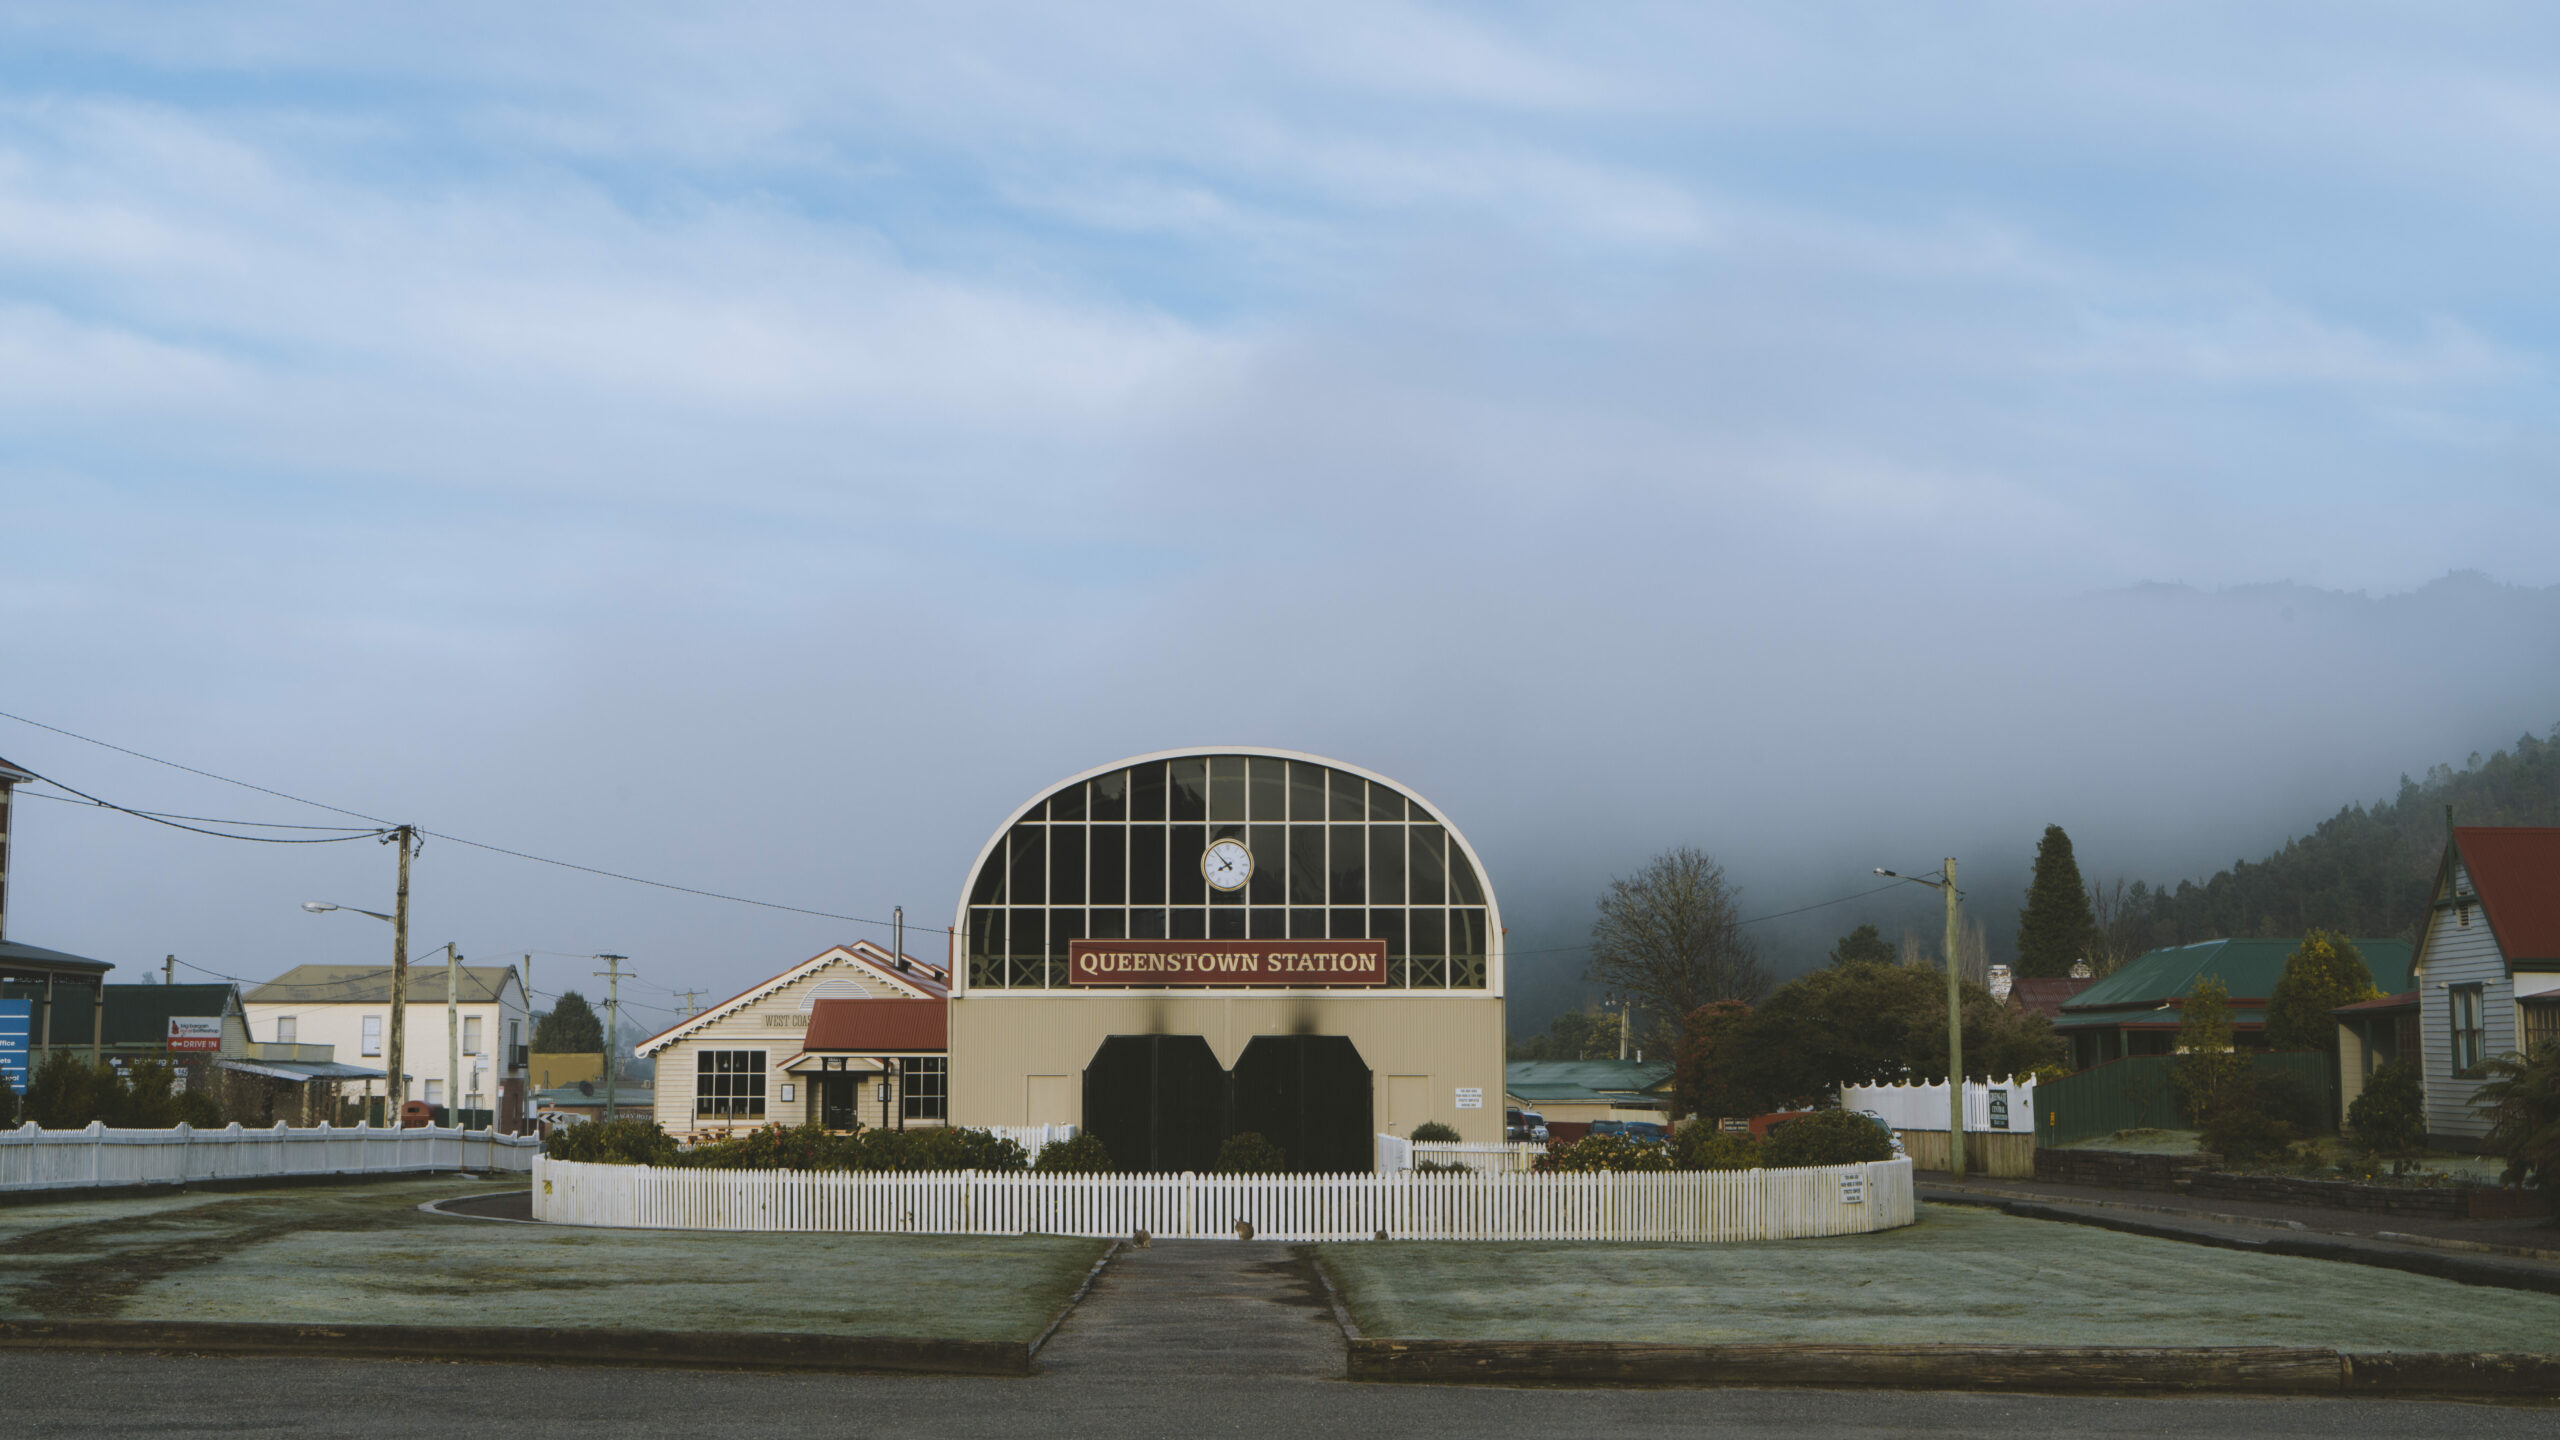 View of Queenstown Station from the car park with two large doors and dome shaped roof